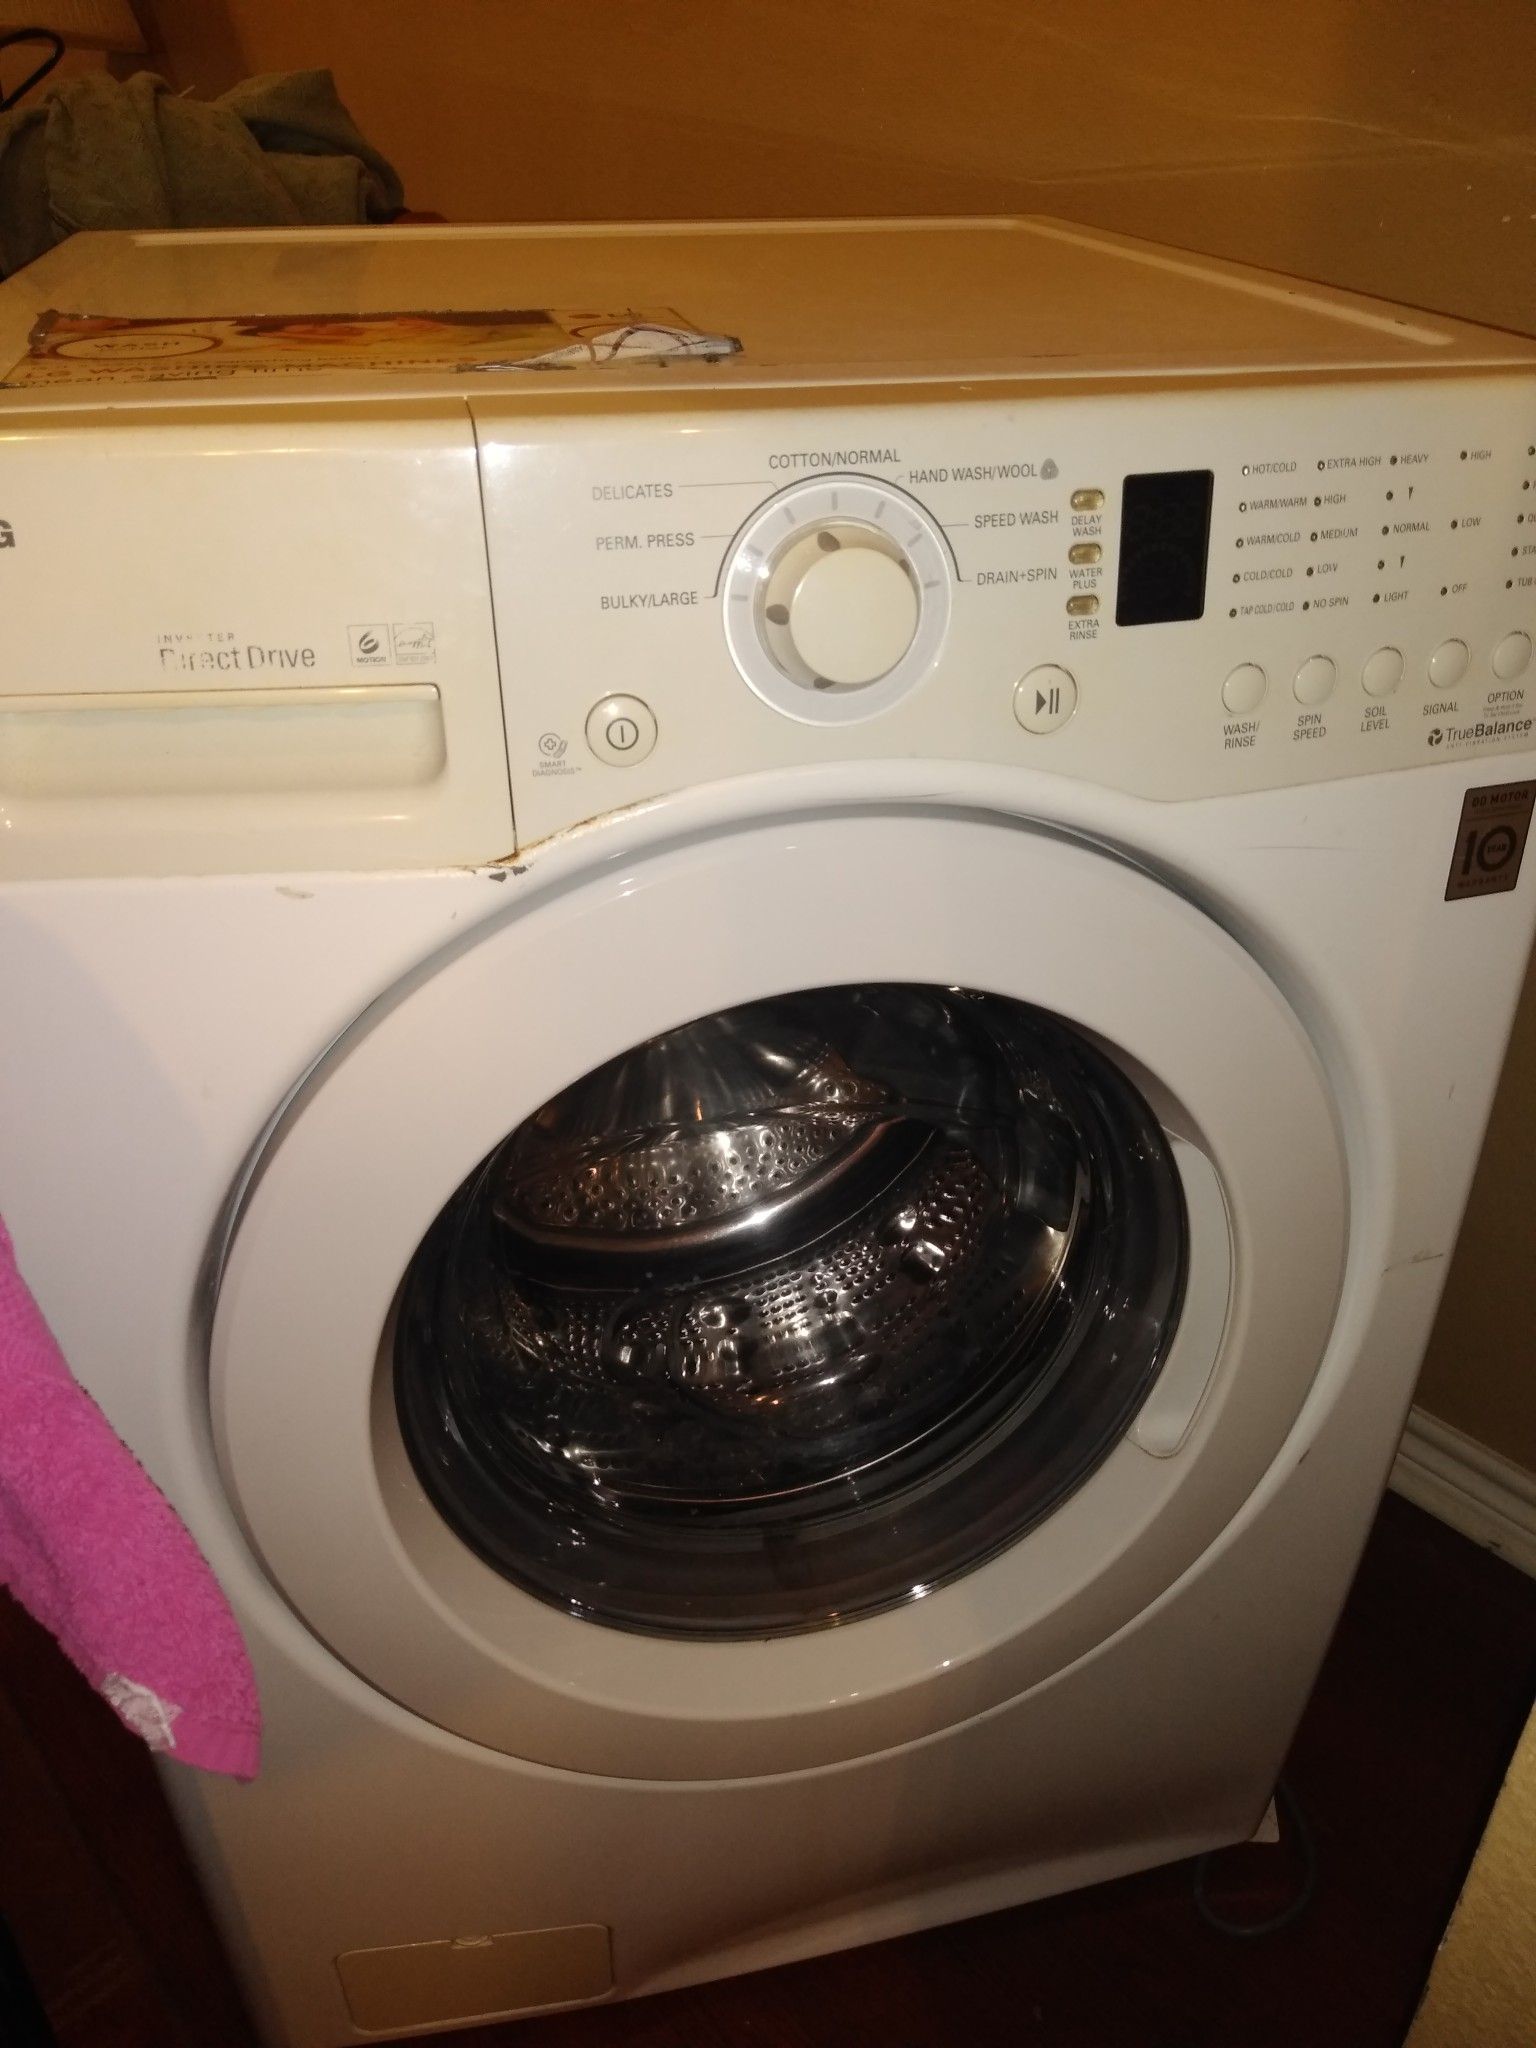 LG Washer for sale 300.00$$$